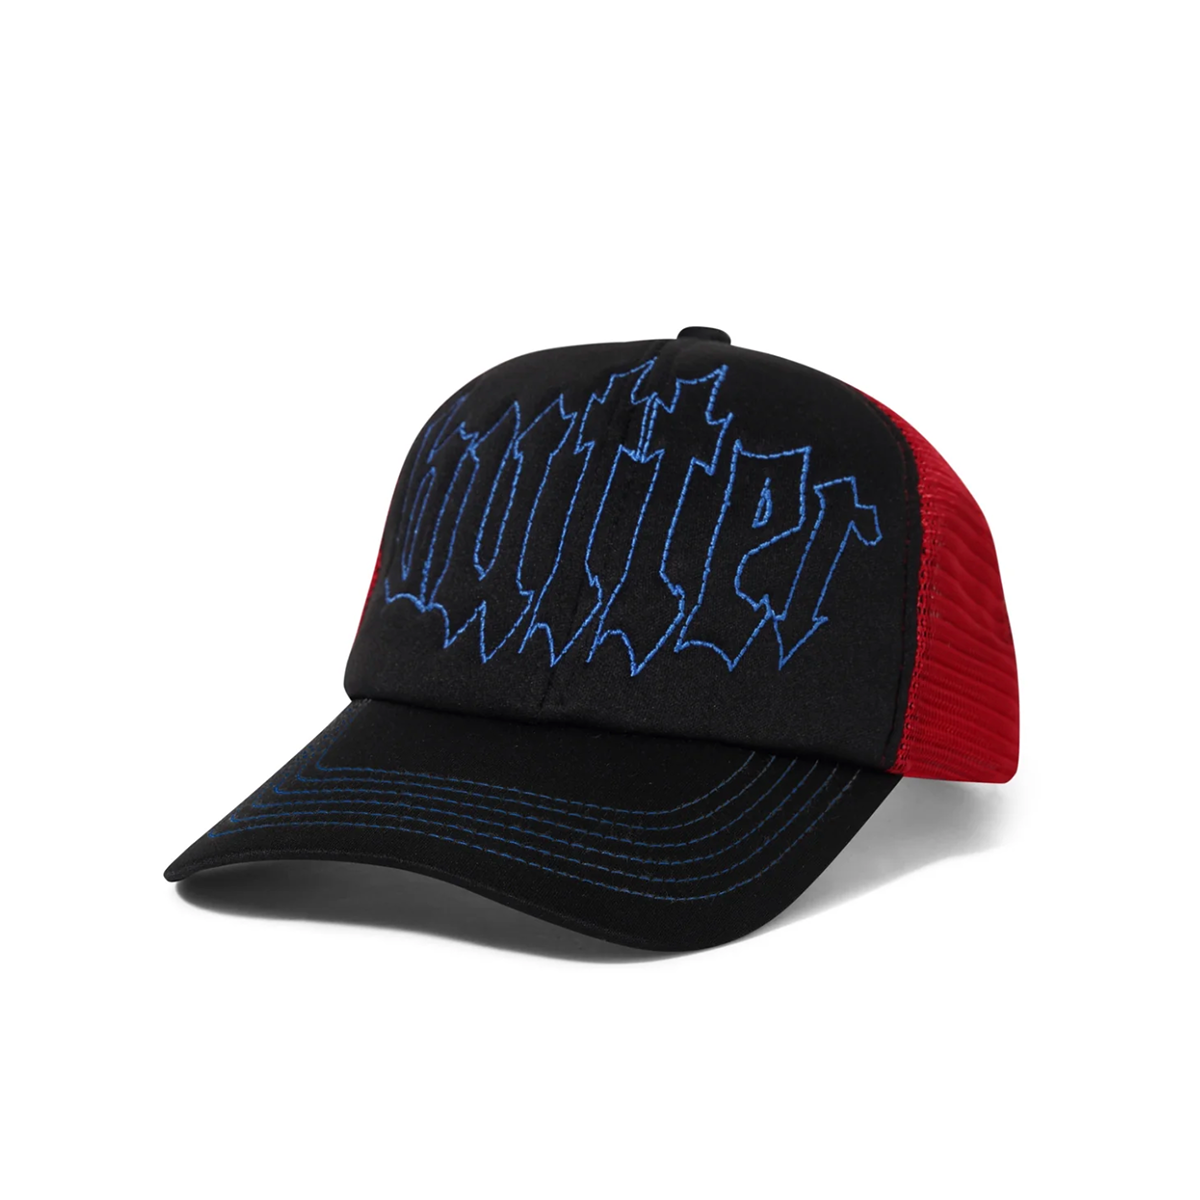 Butter Shock Truck Hat - Assorted Colors